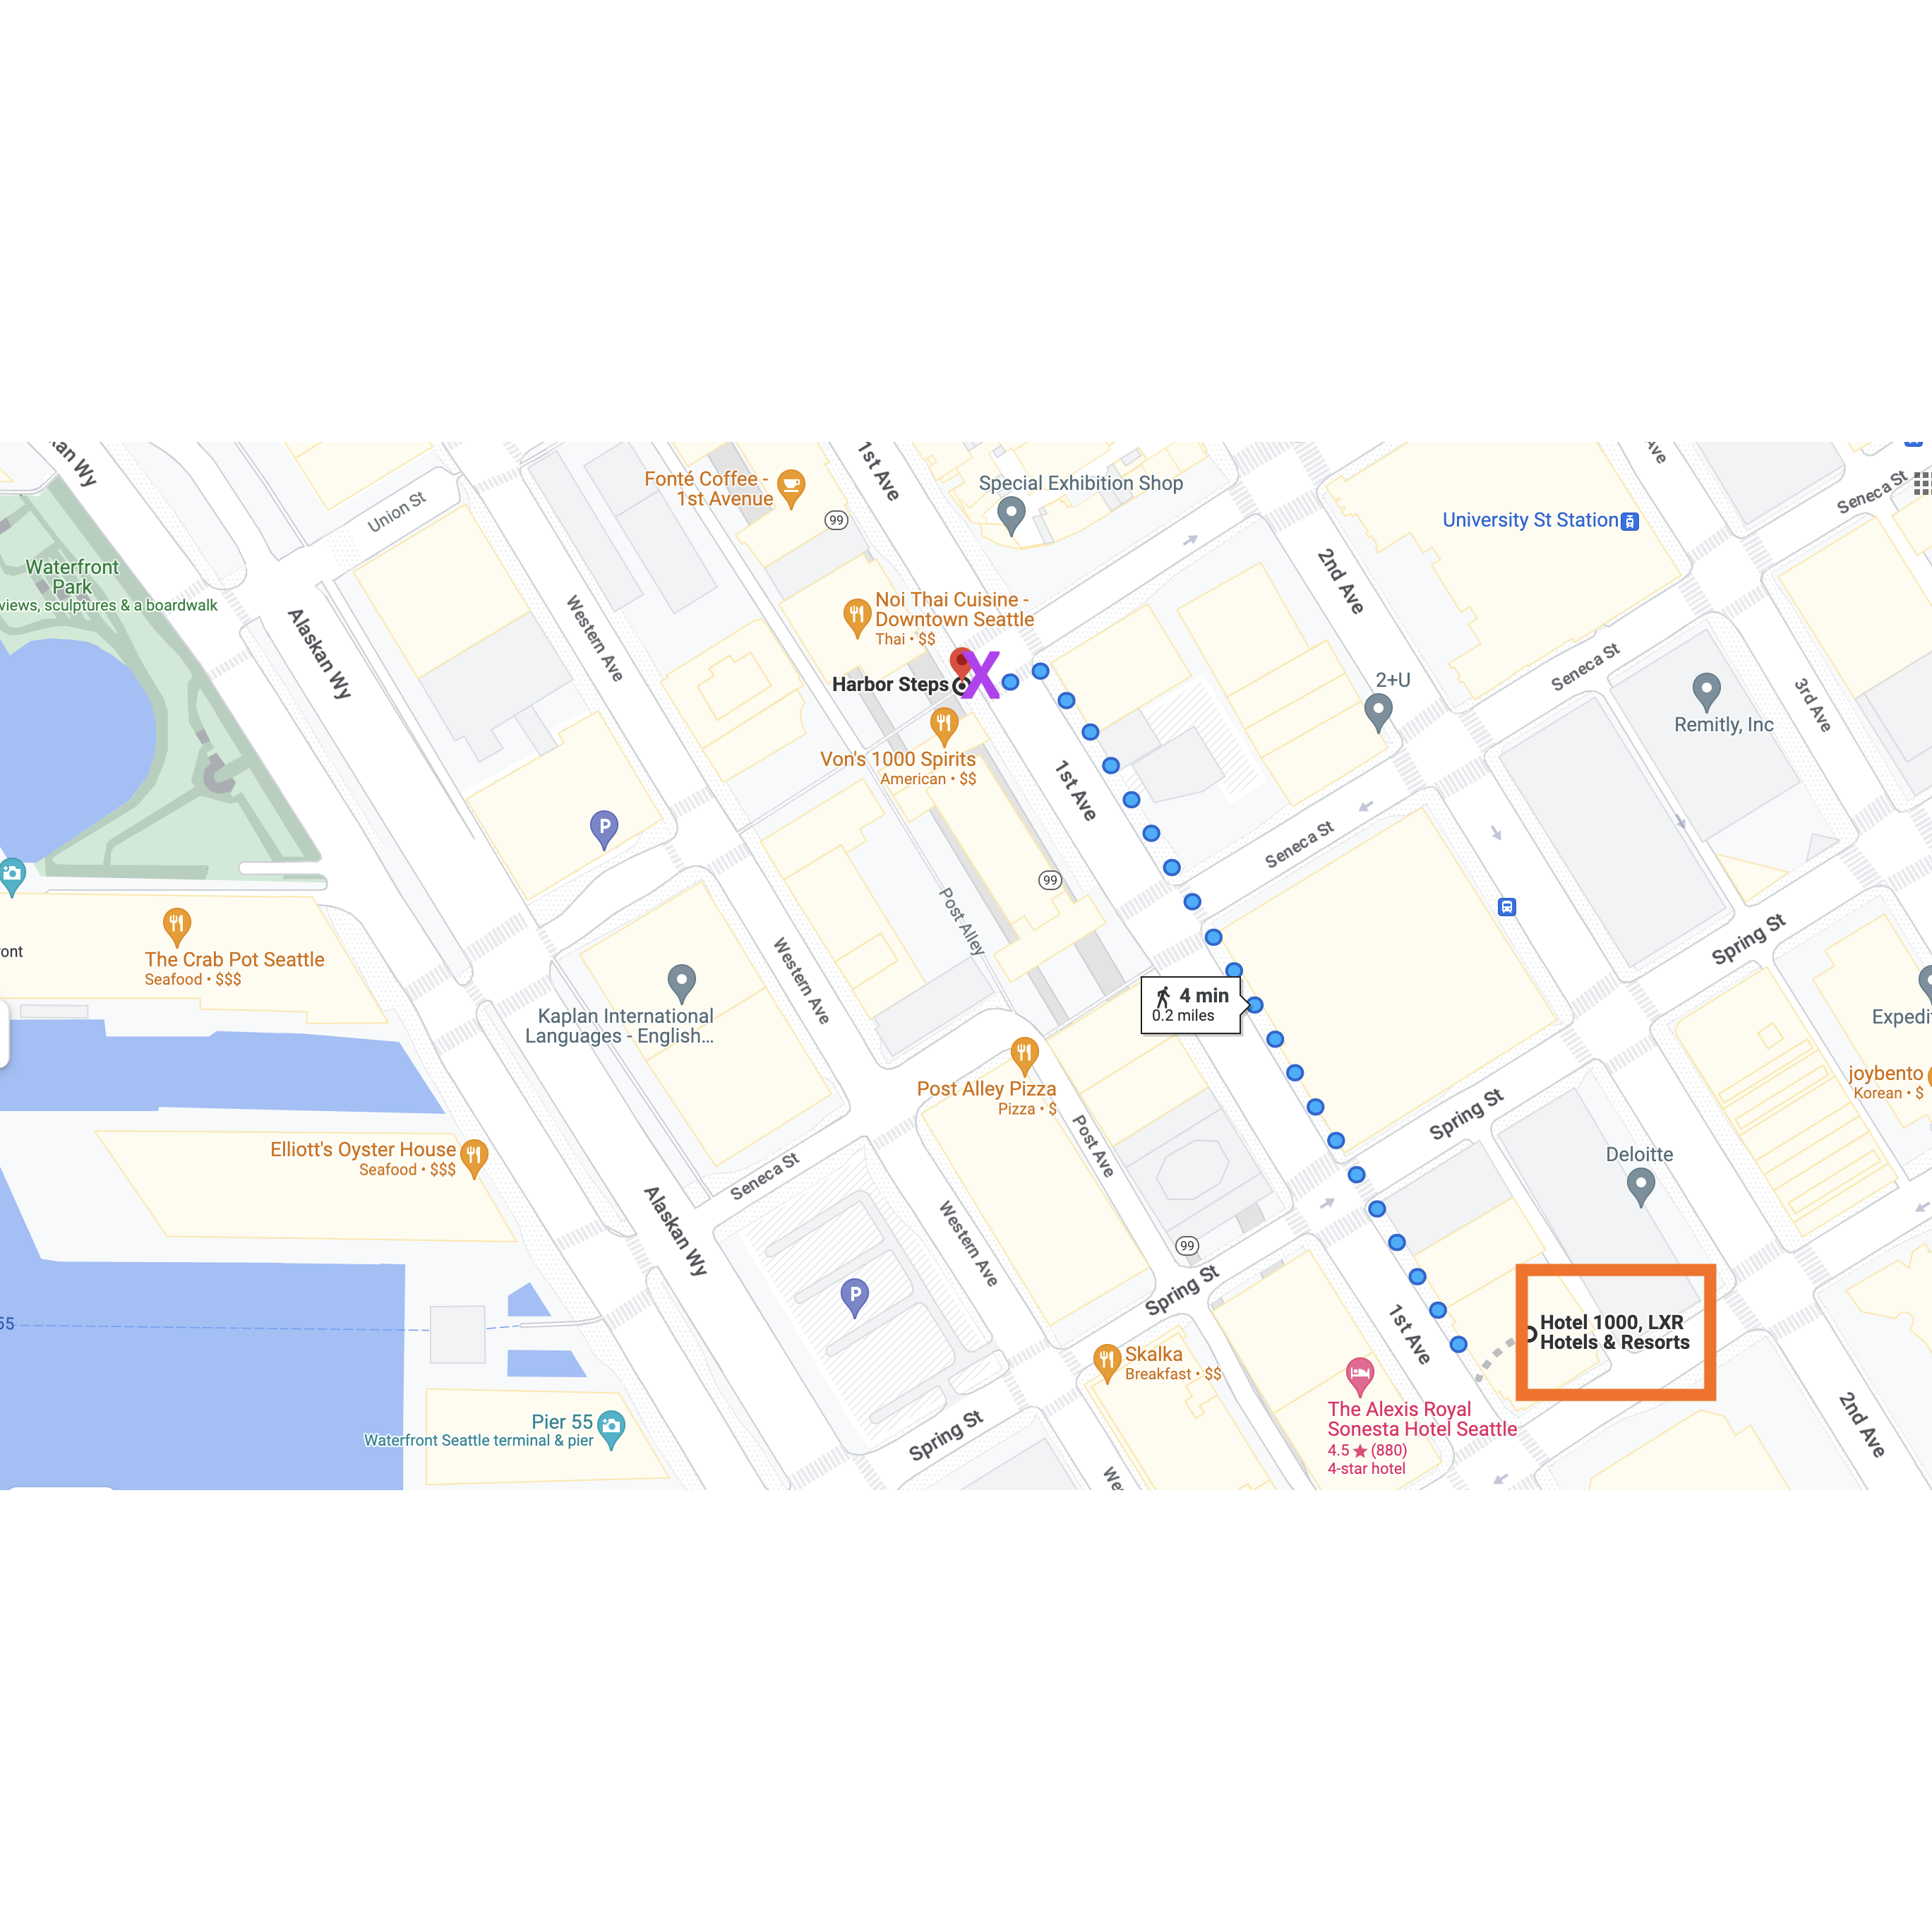 Baraat location and route relative to the hotel. Pink 'X" is baraat meeting point. Orange square is the hotel. "T" intersection of 1st St. and University St.